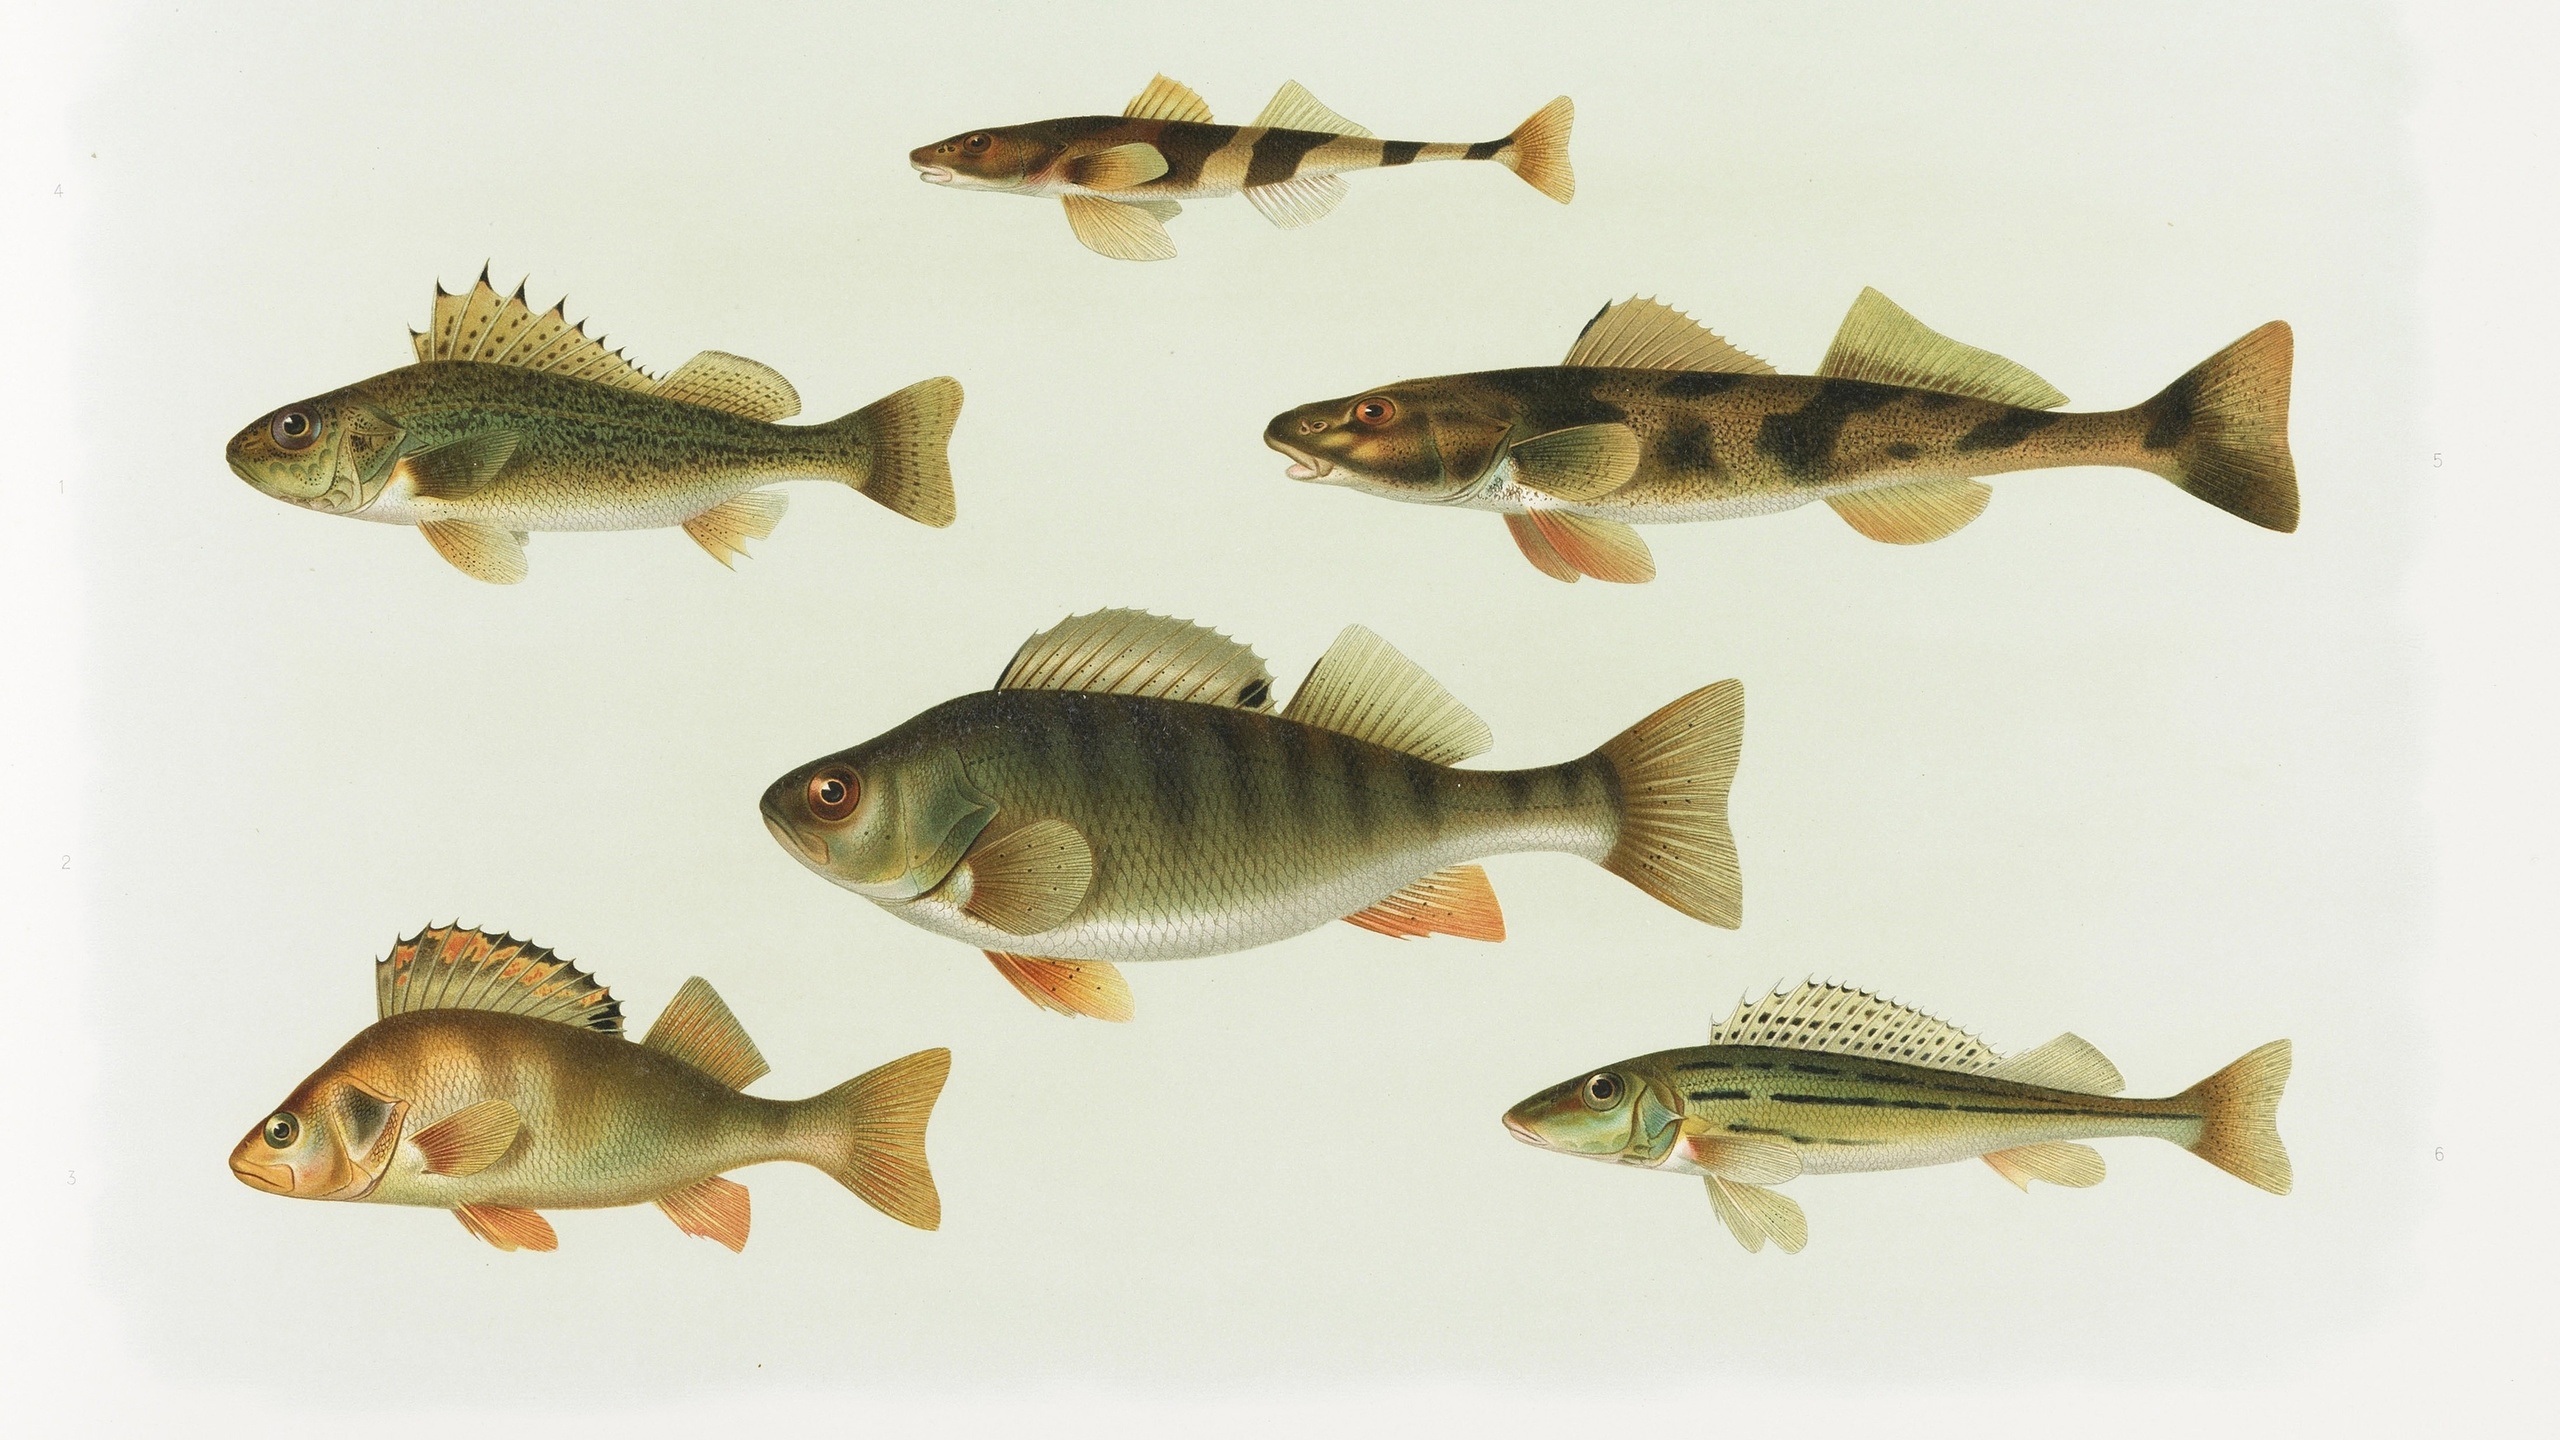 central european freshwater fish, gold perch, lithography